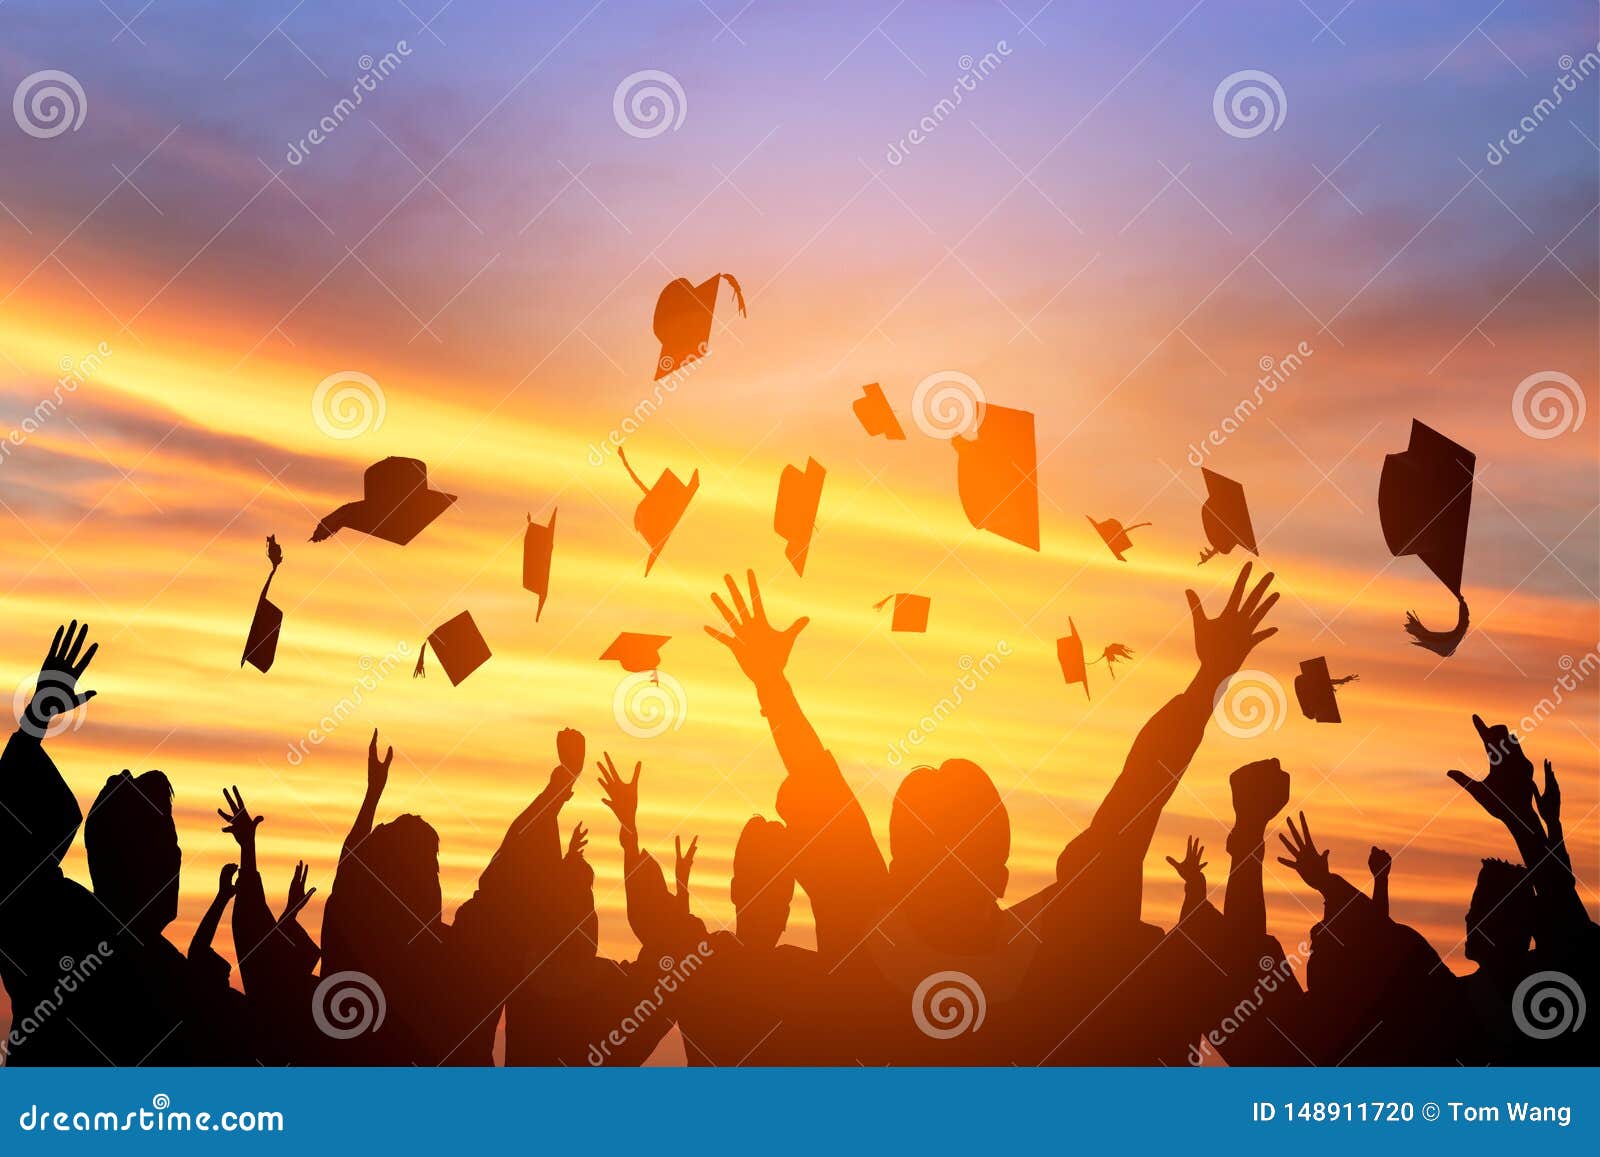 students throwing graduation caps in the air